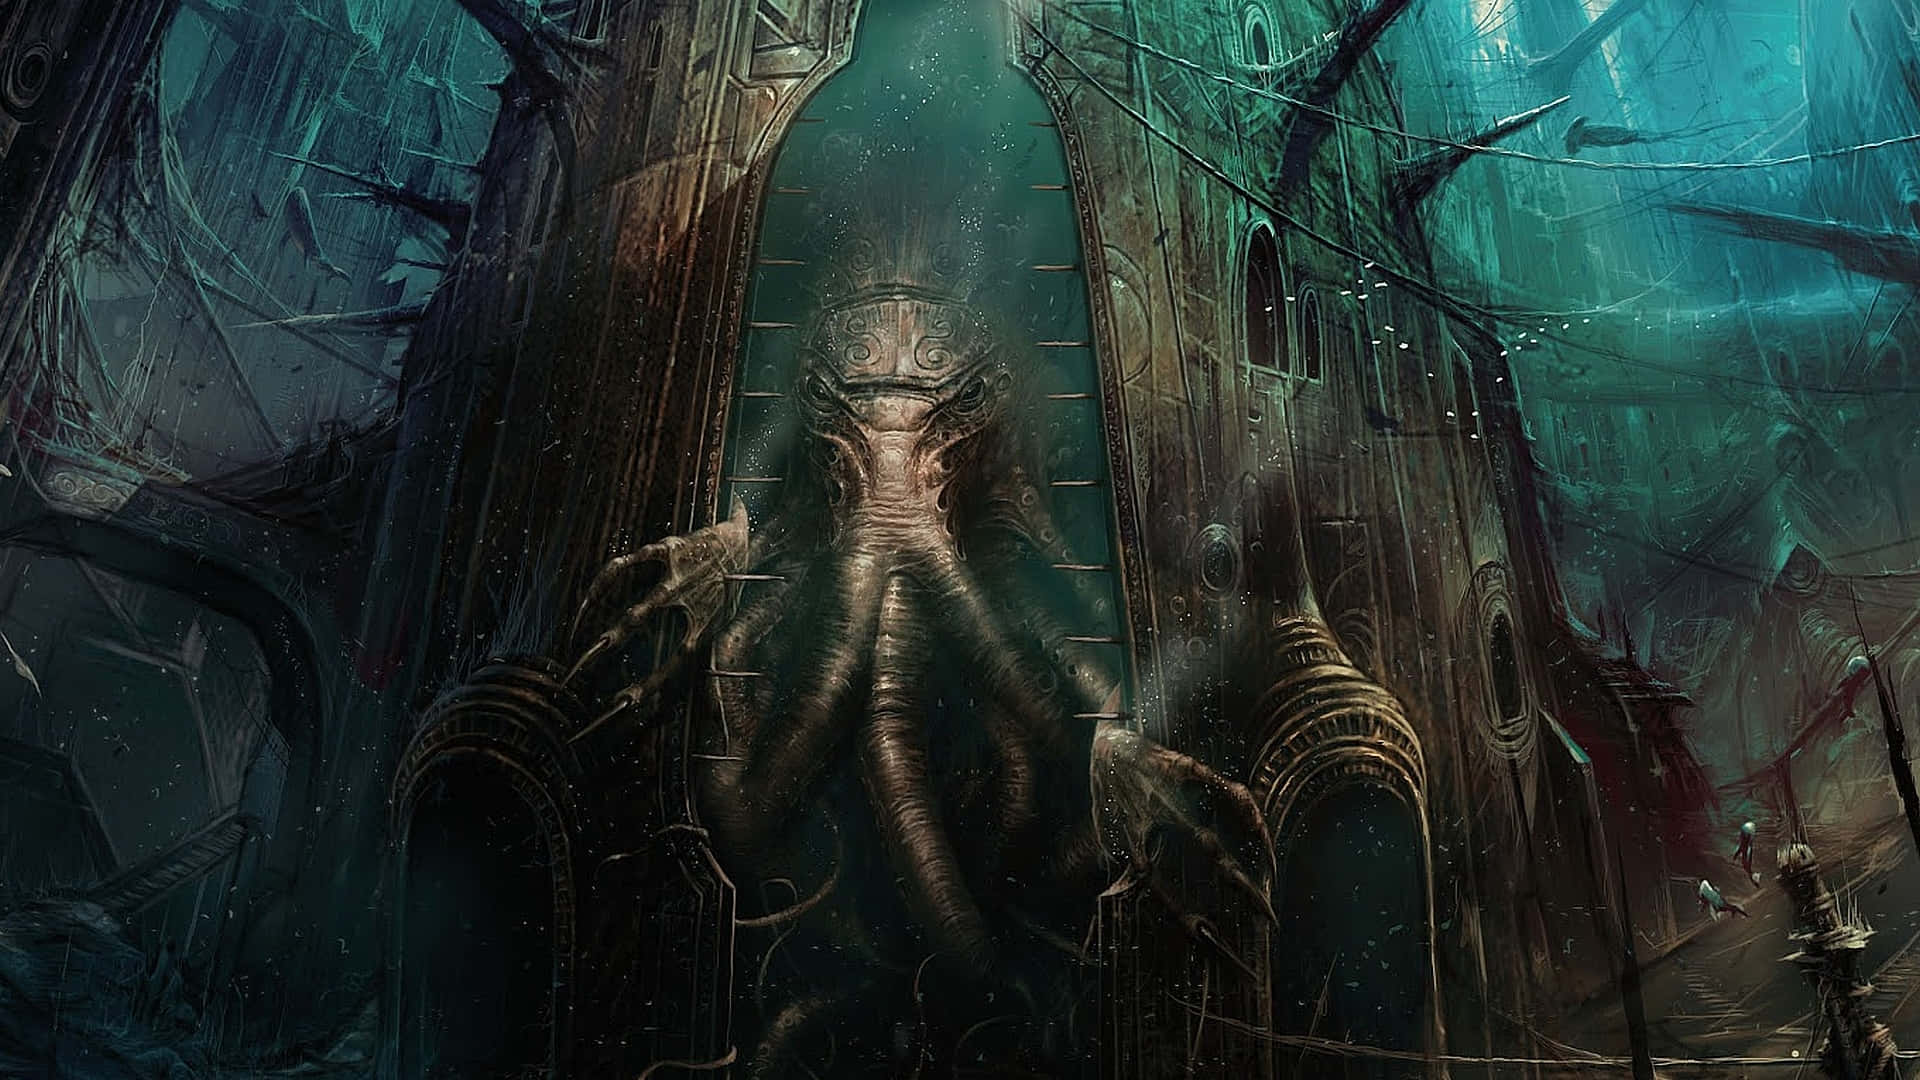 A dark and brooding image of one of the most iconic creatures in H.P. Lovecraft's fiction - the mighty Cthulhu!